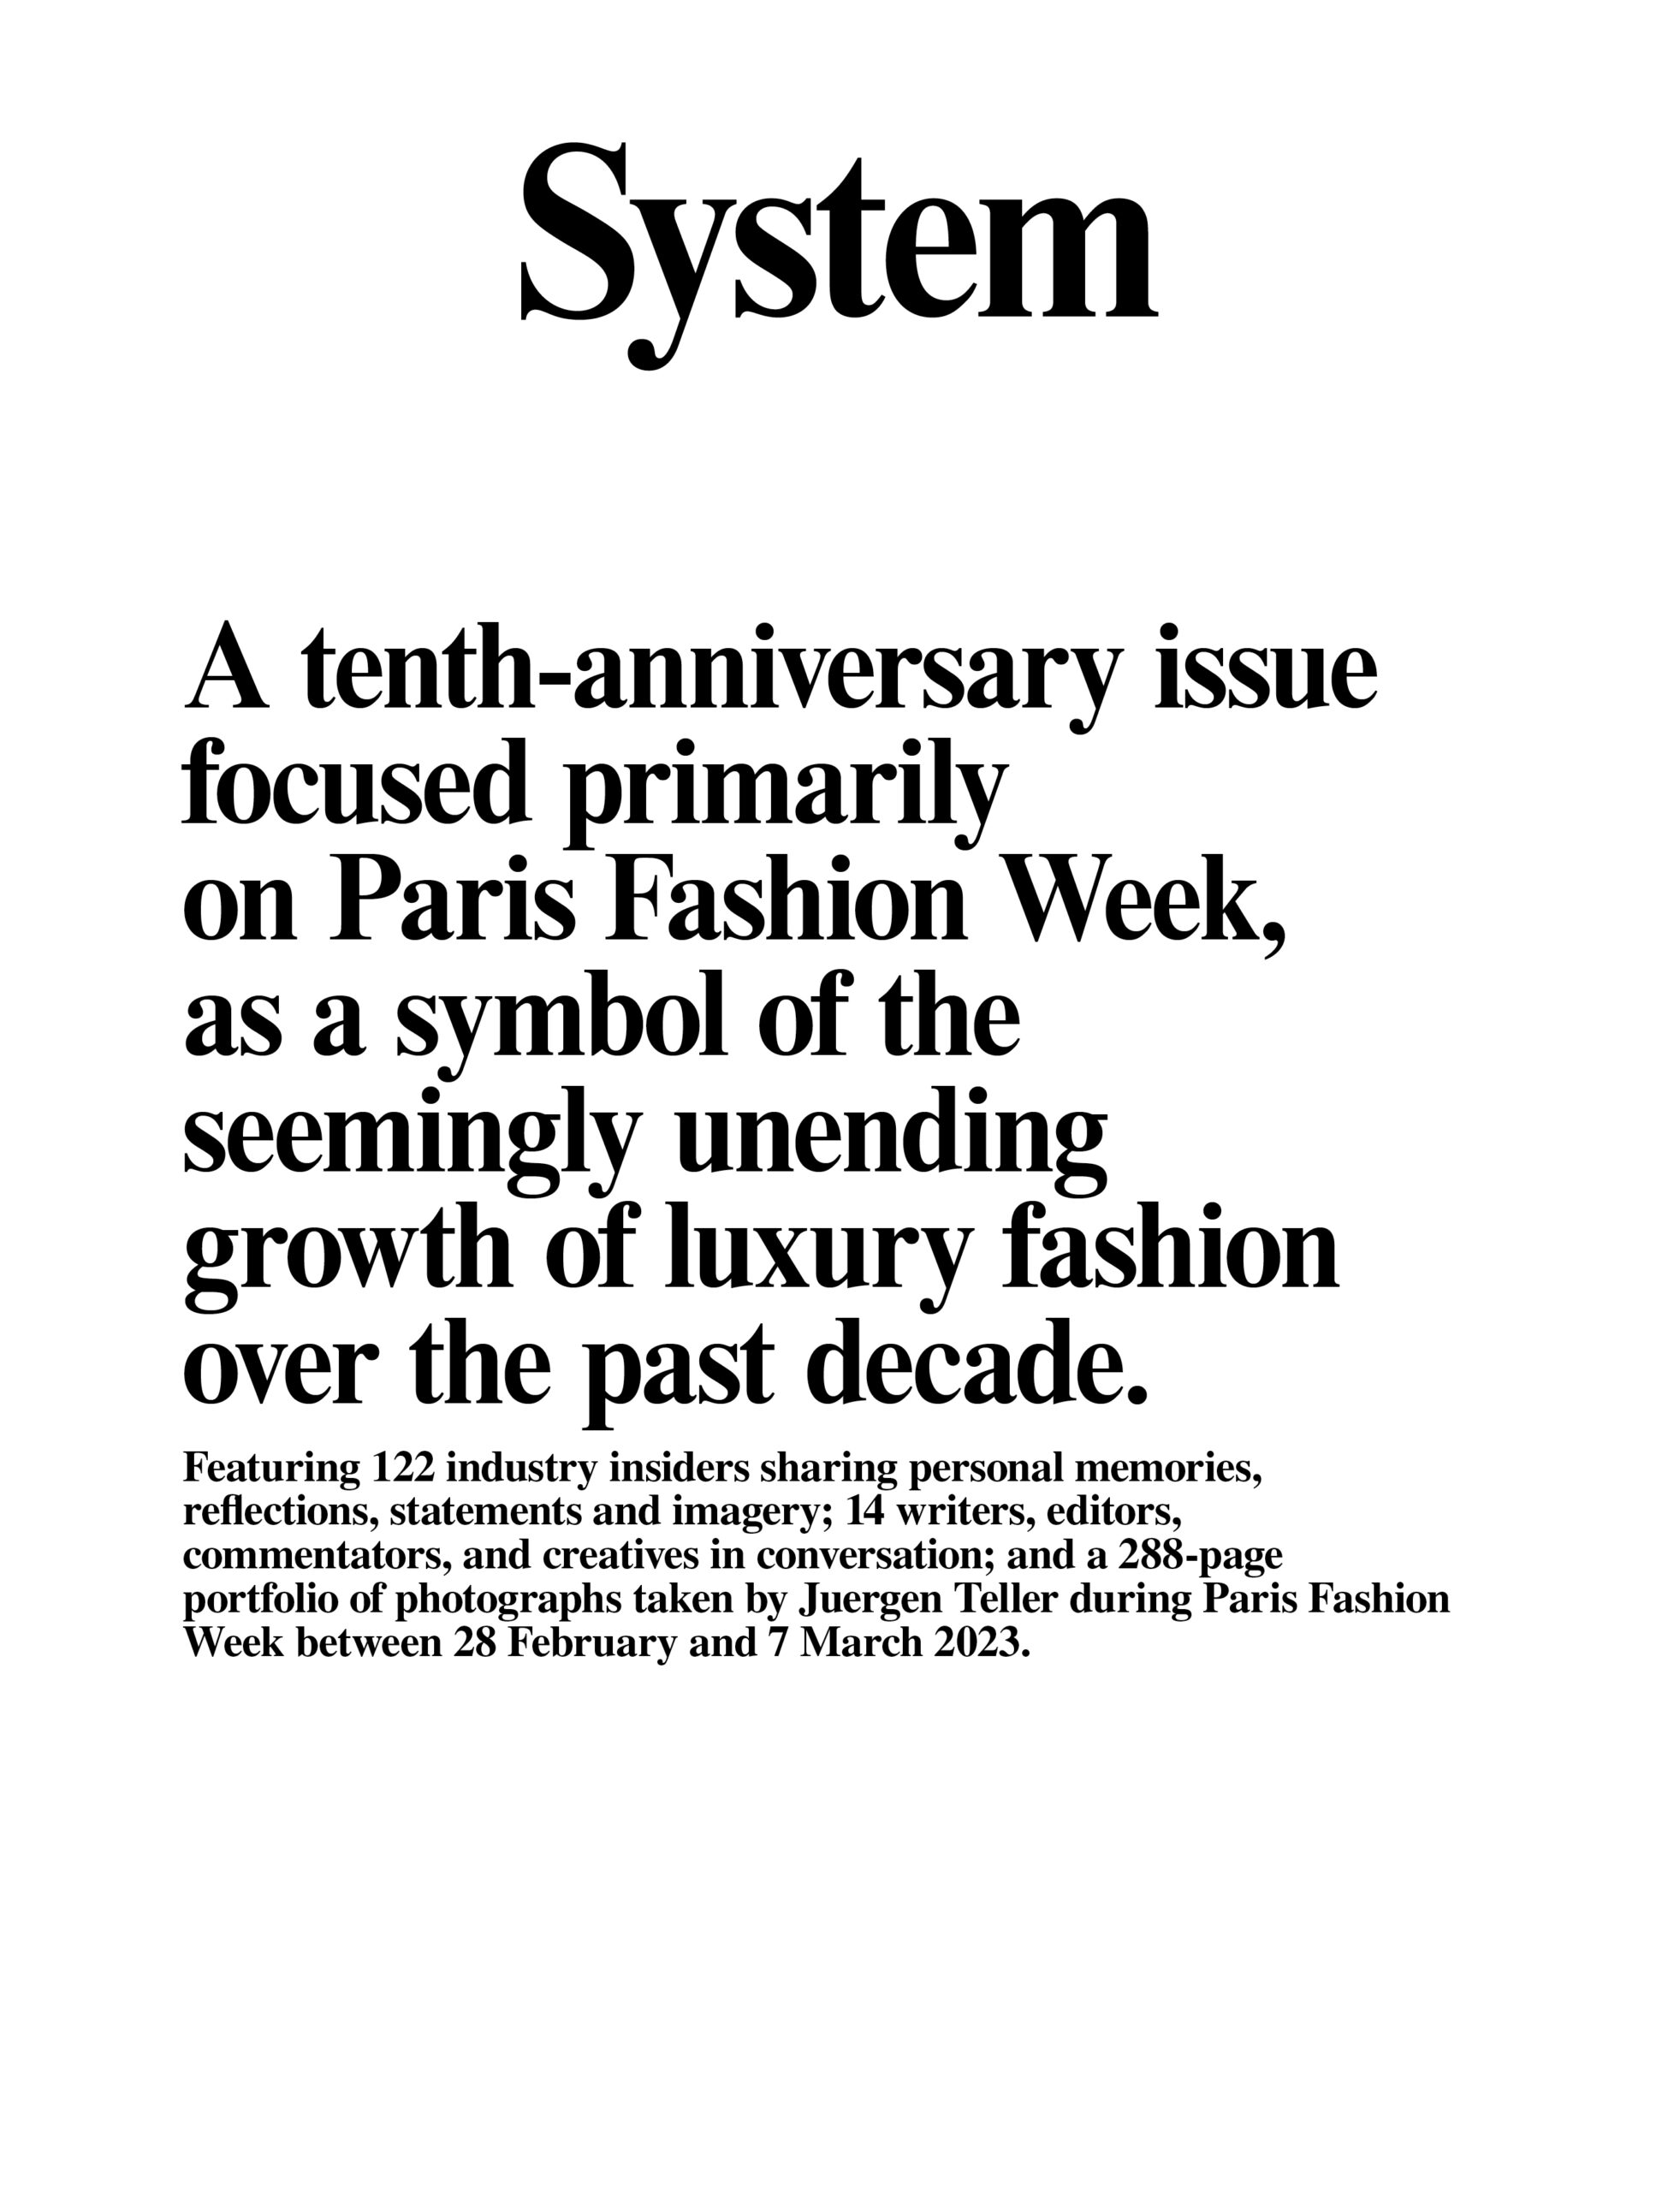 System issue No. 21 – Ten-year anniversary issue